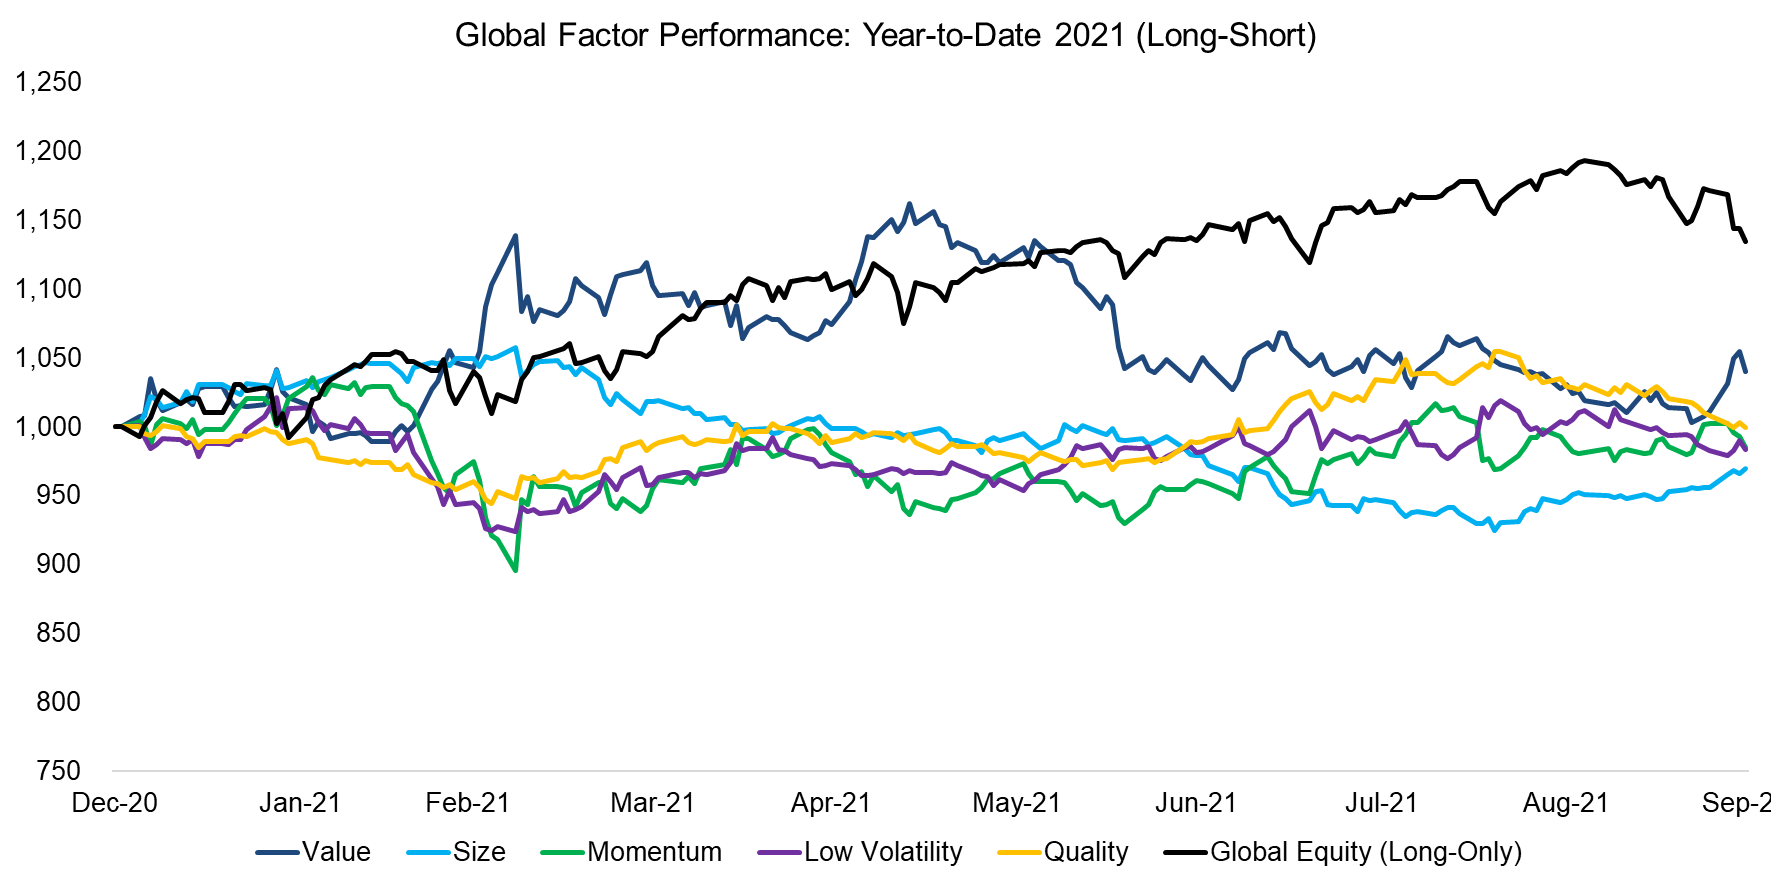 Global Factor Performance Year-to-Date 2021 (Long-Short)